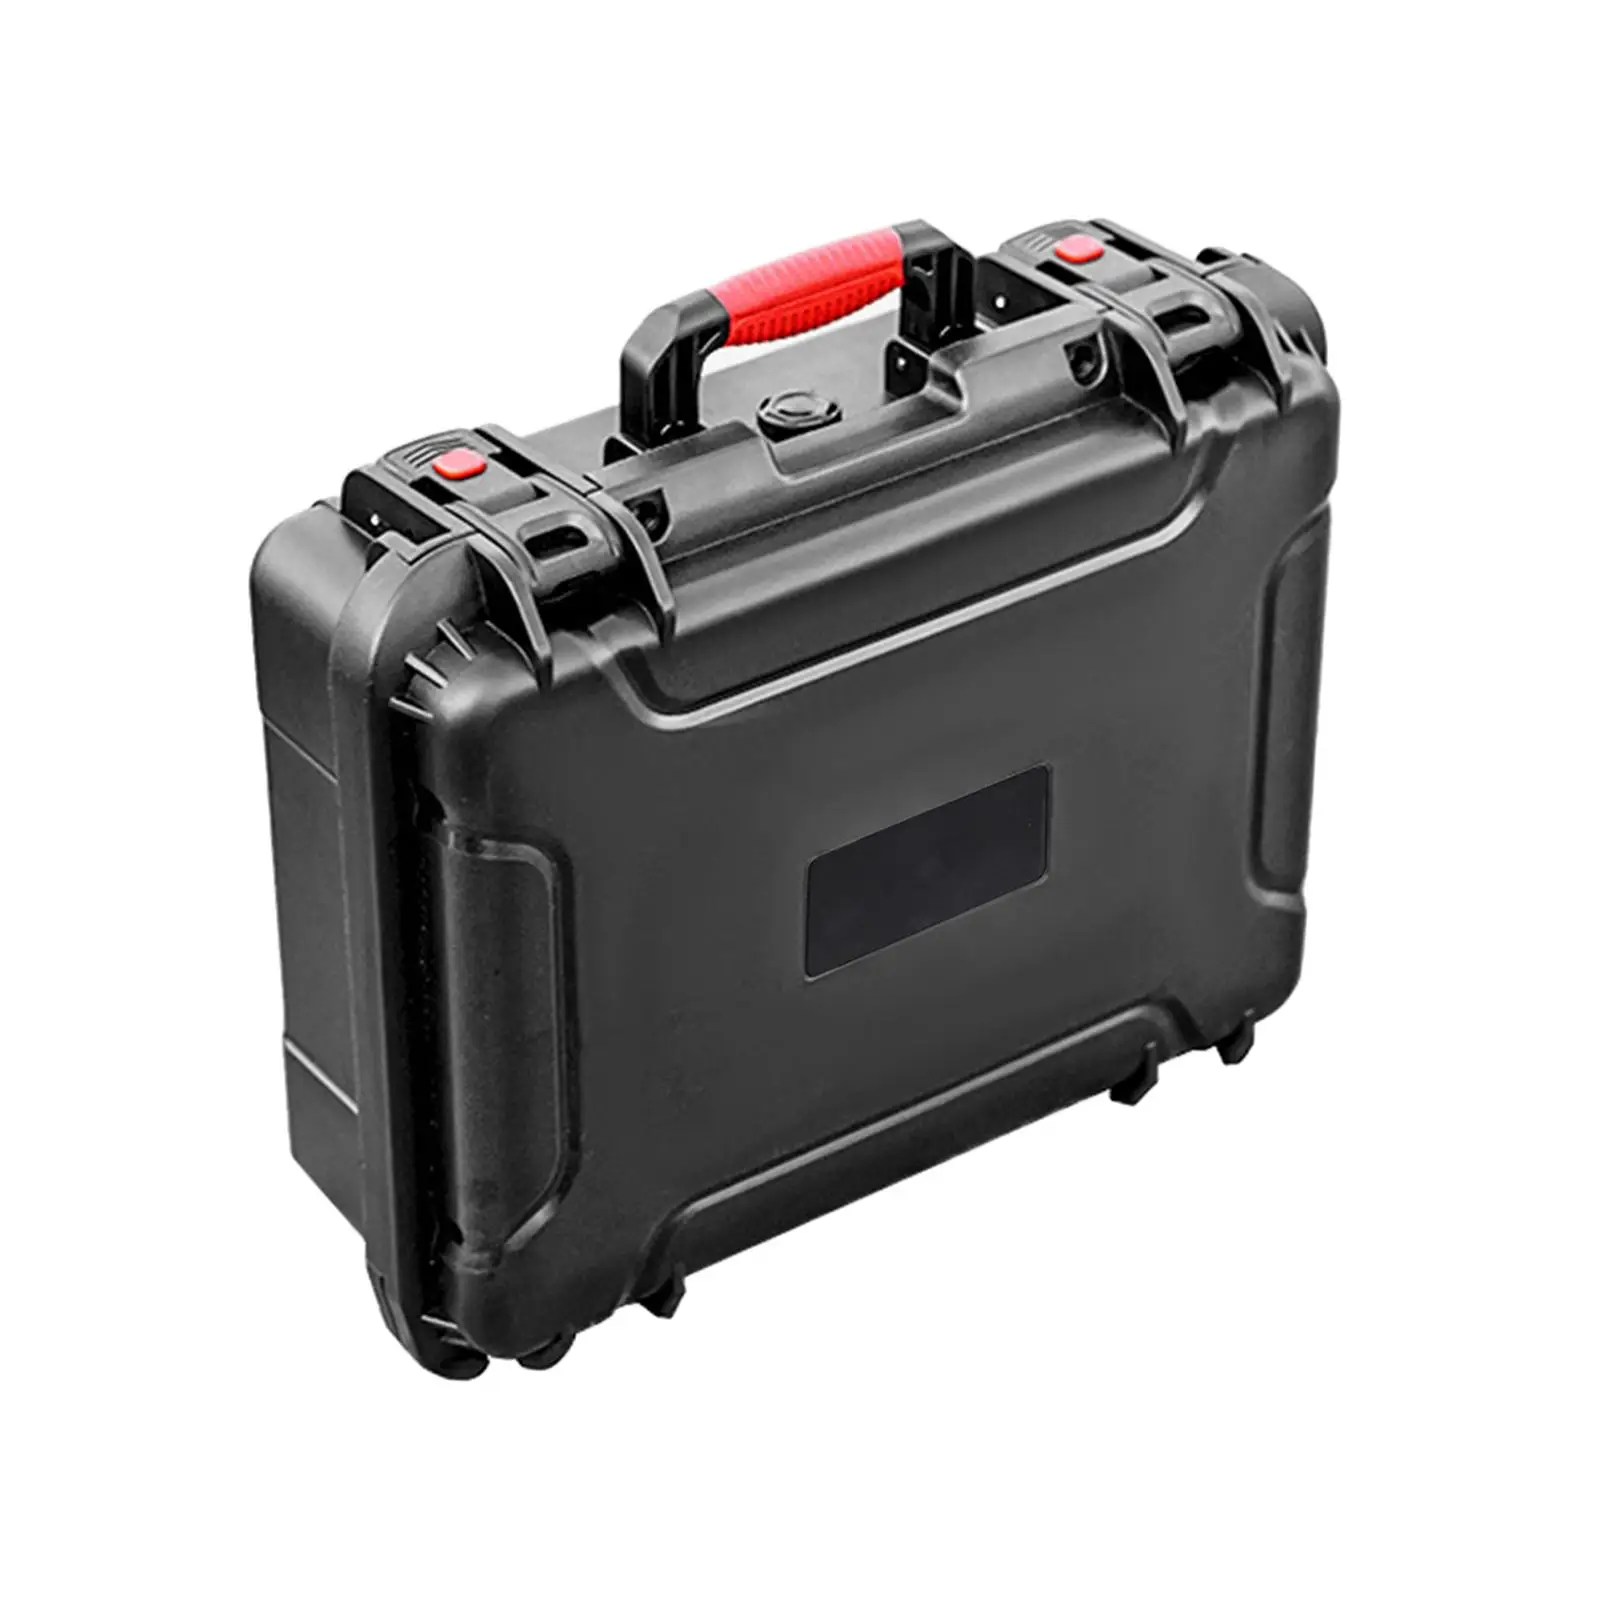 Drone Carrying Case Sponge Liner Slots Portable Hard Case for Air 3 Drone RC Quadcopter Remote and Smart Controller, Propellers